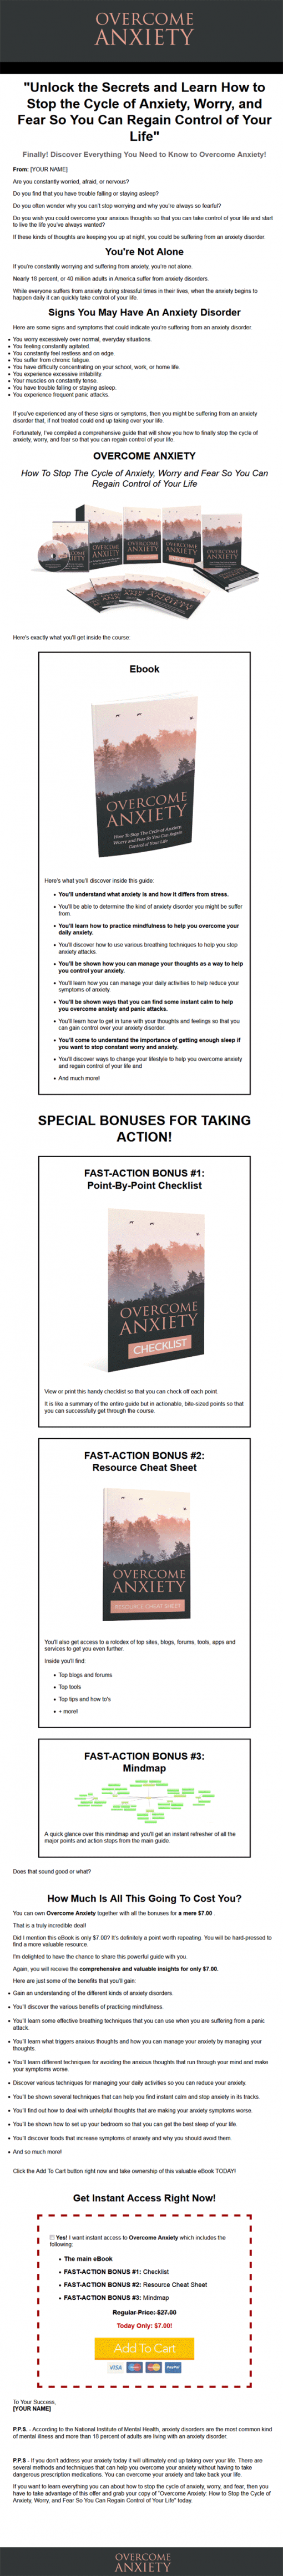 Overcome Anxiety Ebook and Videos with Master Resale Rights